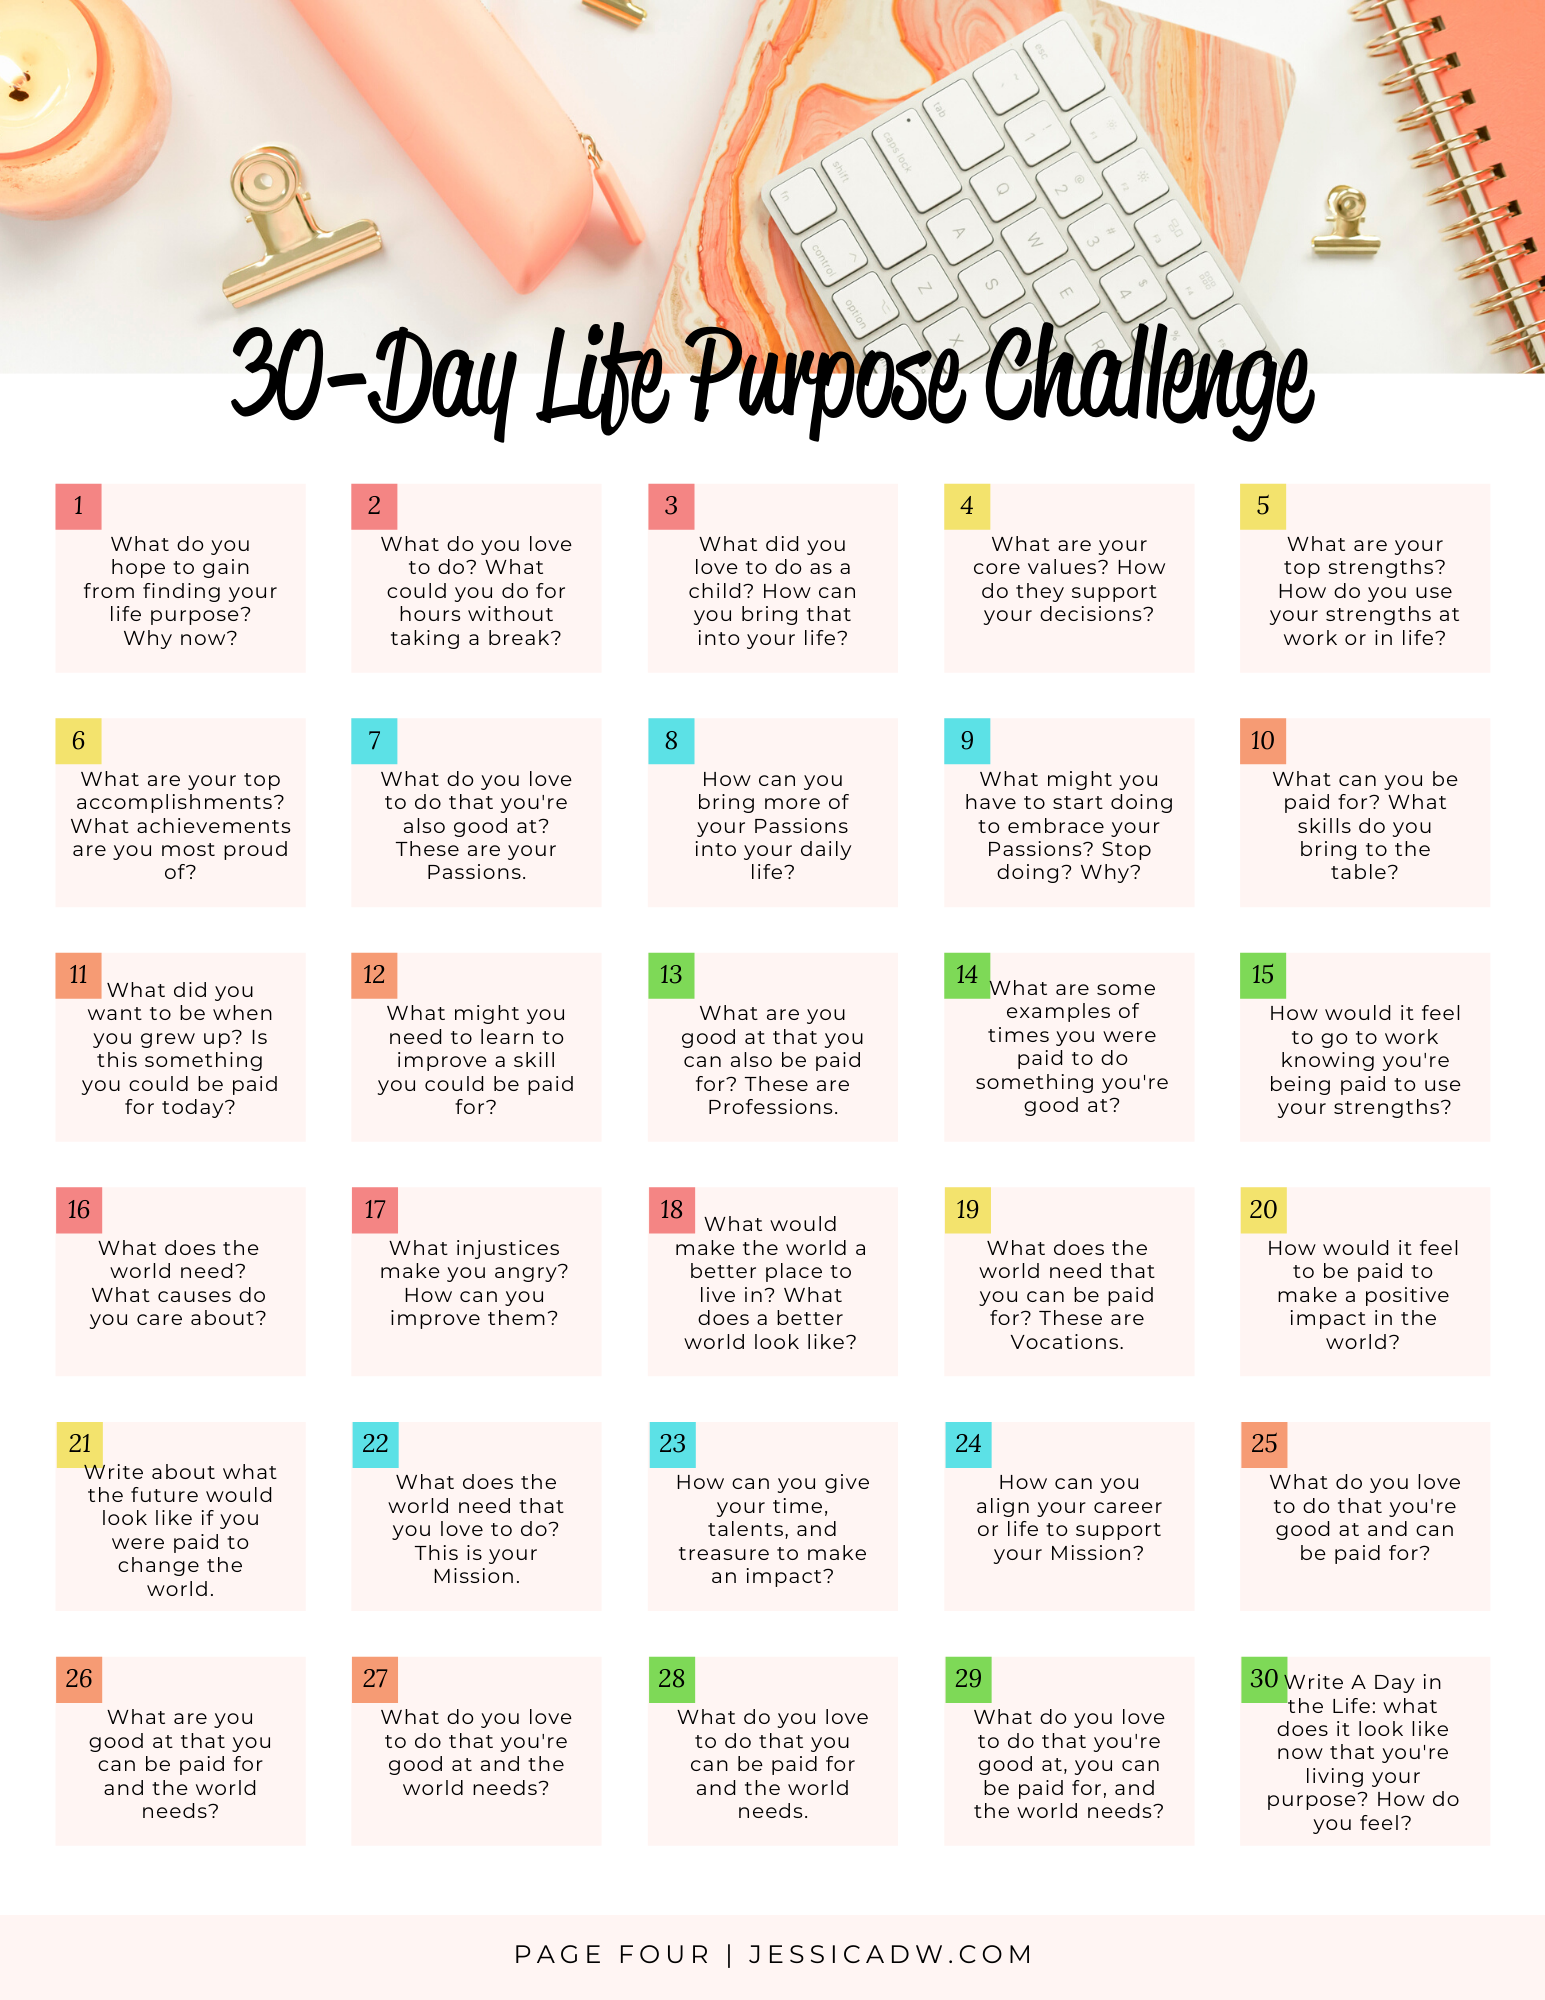 30 Things You Should Do Everyday To Be a Better Person